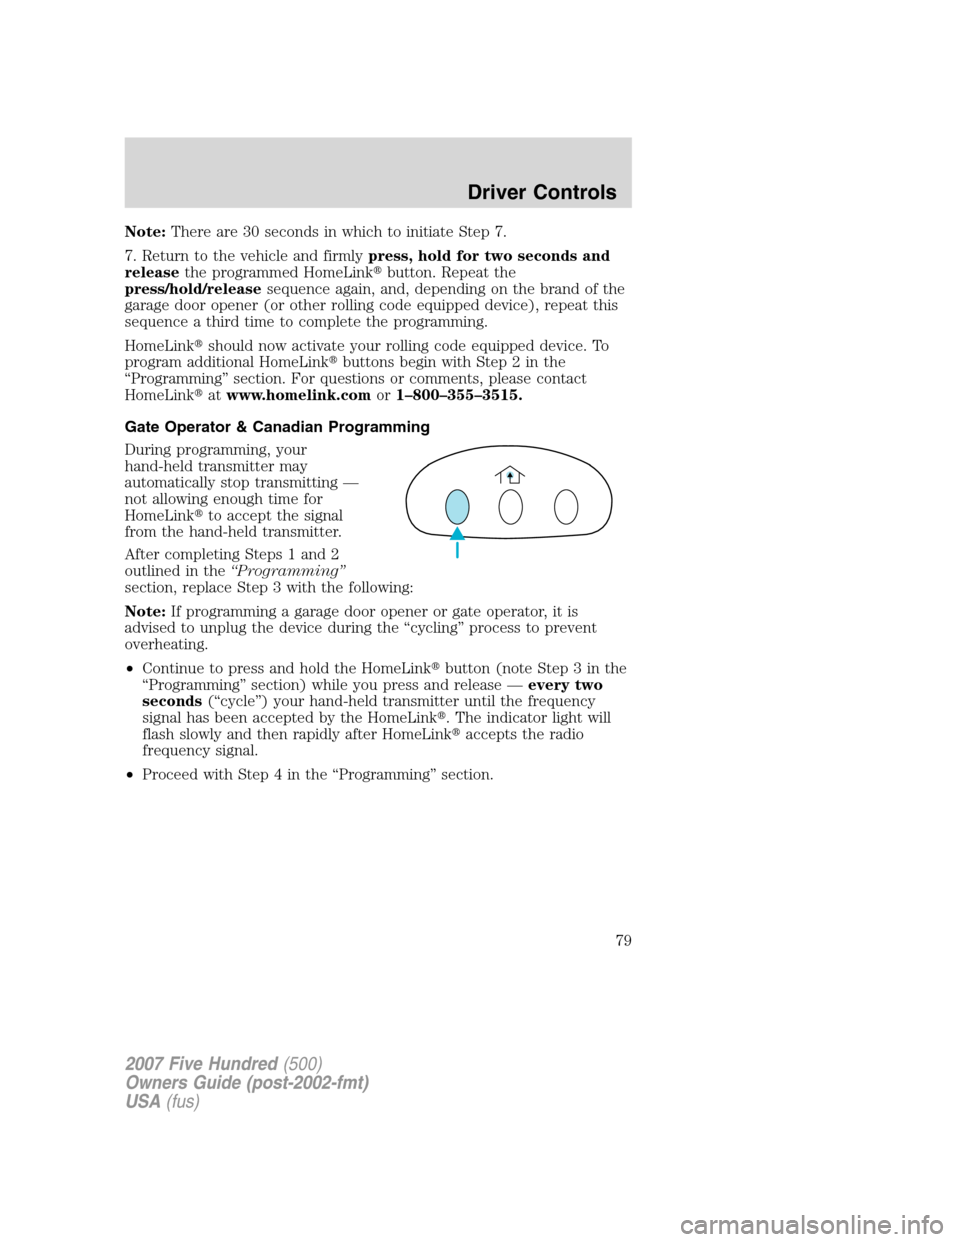 FORD FIVE HUNDRED 2007 D258 / 1.G Owners Manual Note:There are 30 seconds in which to initiate Step 7.
7. Return to the vehicle and firmlypress, hold for two seconds and
releasethe programmed HomeLinkbutton. Repeat the
press/hold/releasesequence a